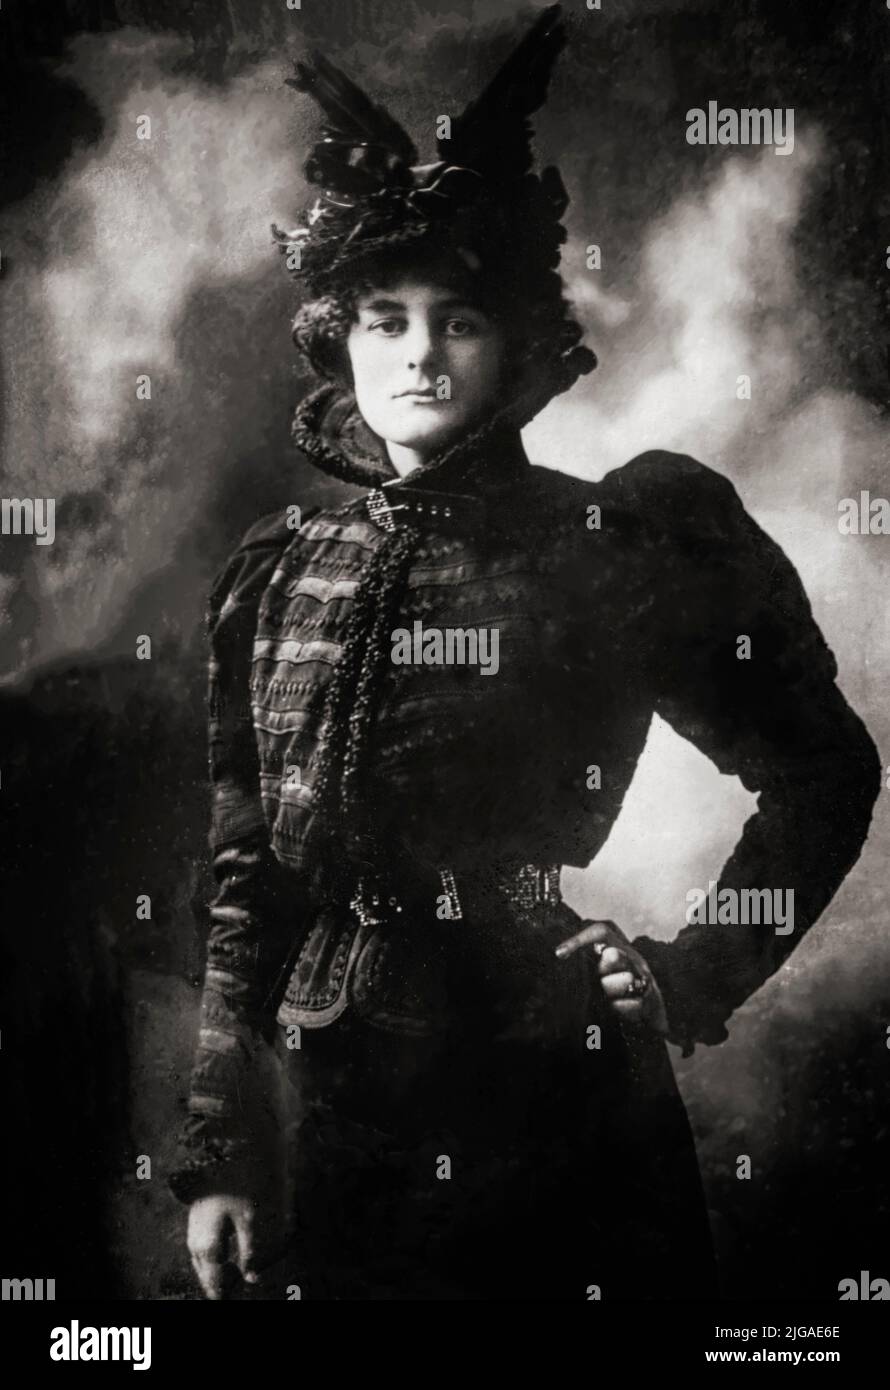 A portrait of Maud Gonne MacBride (1866-1953), an English-born Irish republican revolutionary, suffragette and actress. Of Anglo-Irish descent, she converted to Irish nationalism following the plight of evicted people in the Land Wars. She actively agitated for Home Rule and then for the republic declared in 1916. She was also well known for being the muse and long-time love interest of Irish poet W. B. Yeats. Stock Photo